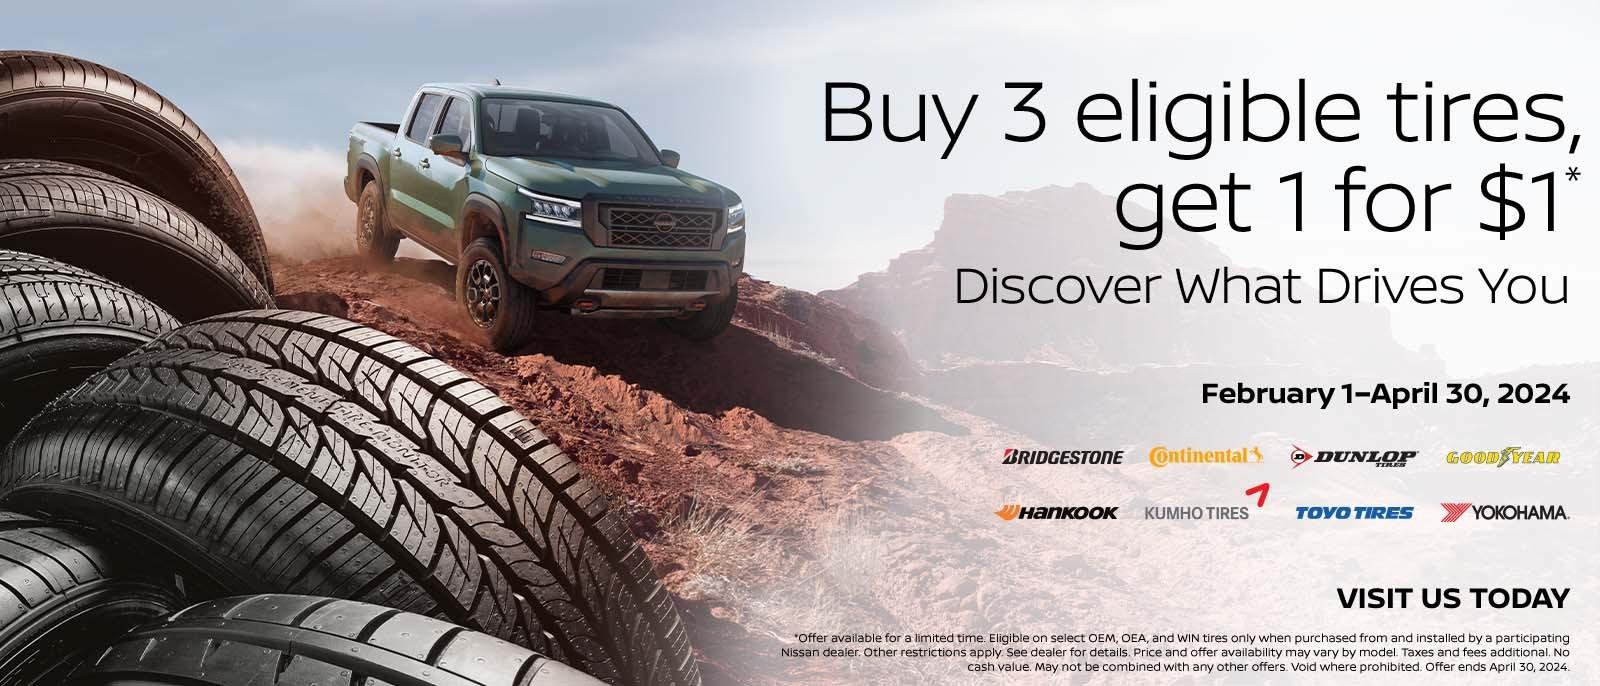 Buy 3 eligible tires, get 1 for $1
Discover what drives you